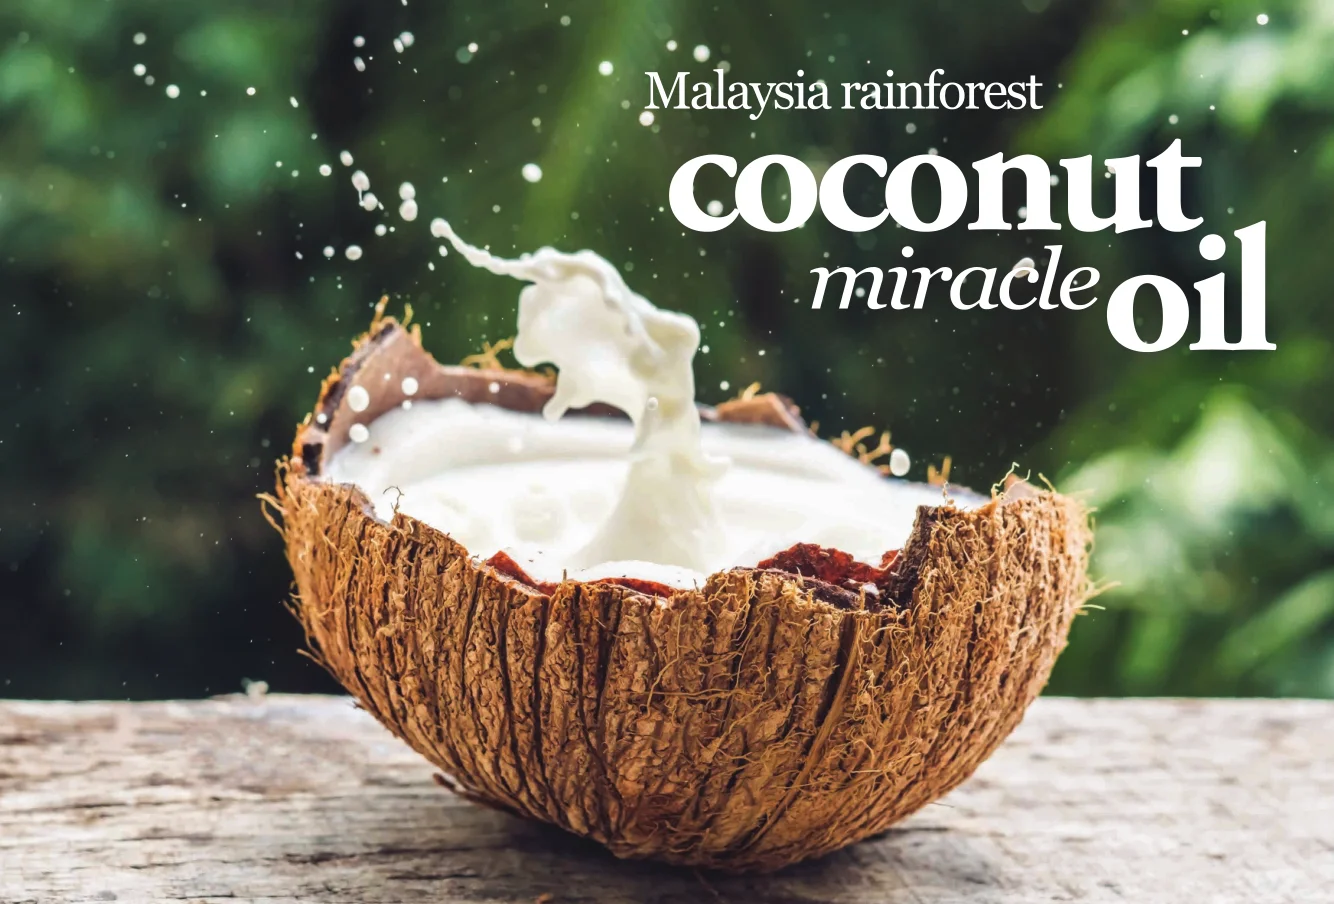 Damage remedy coconut miracle oil para que sirve